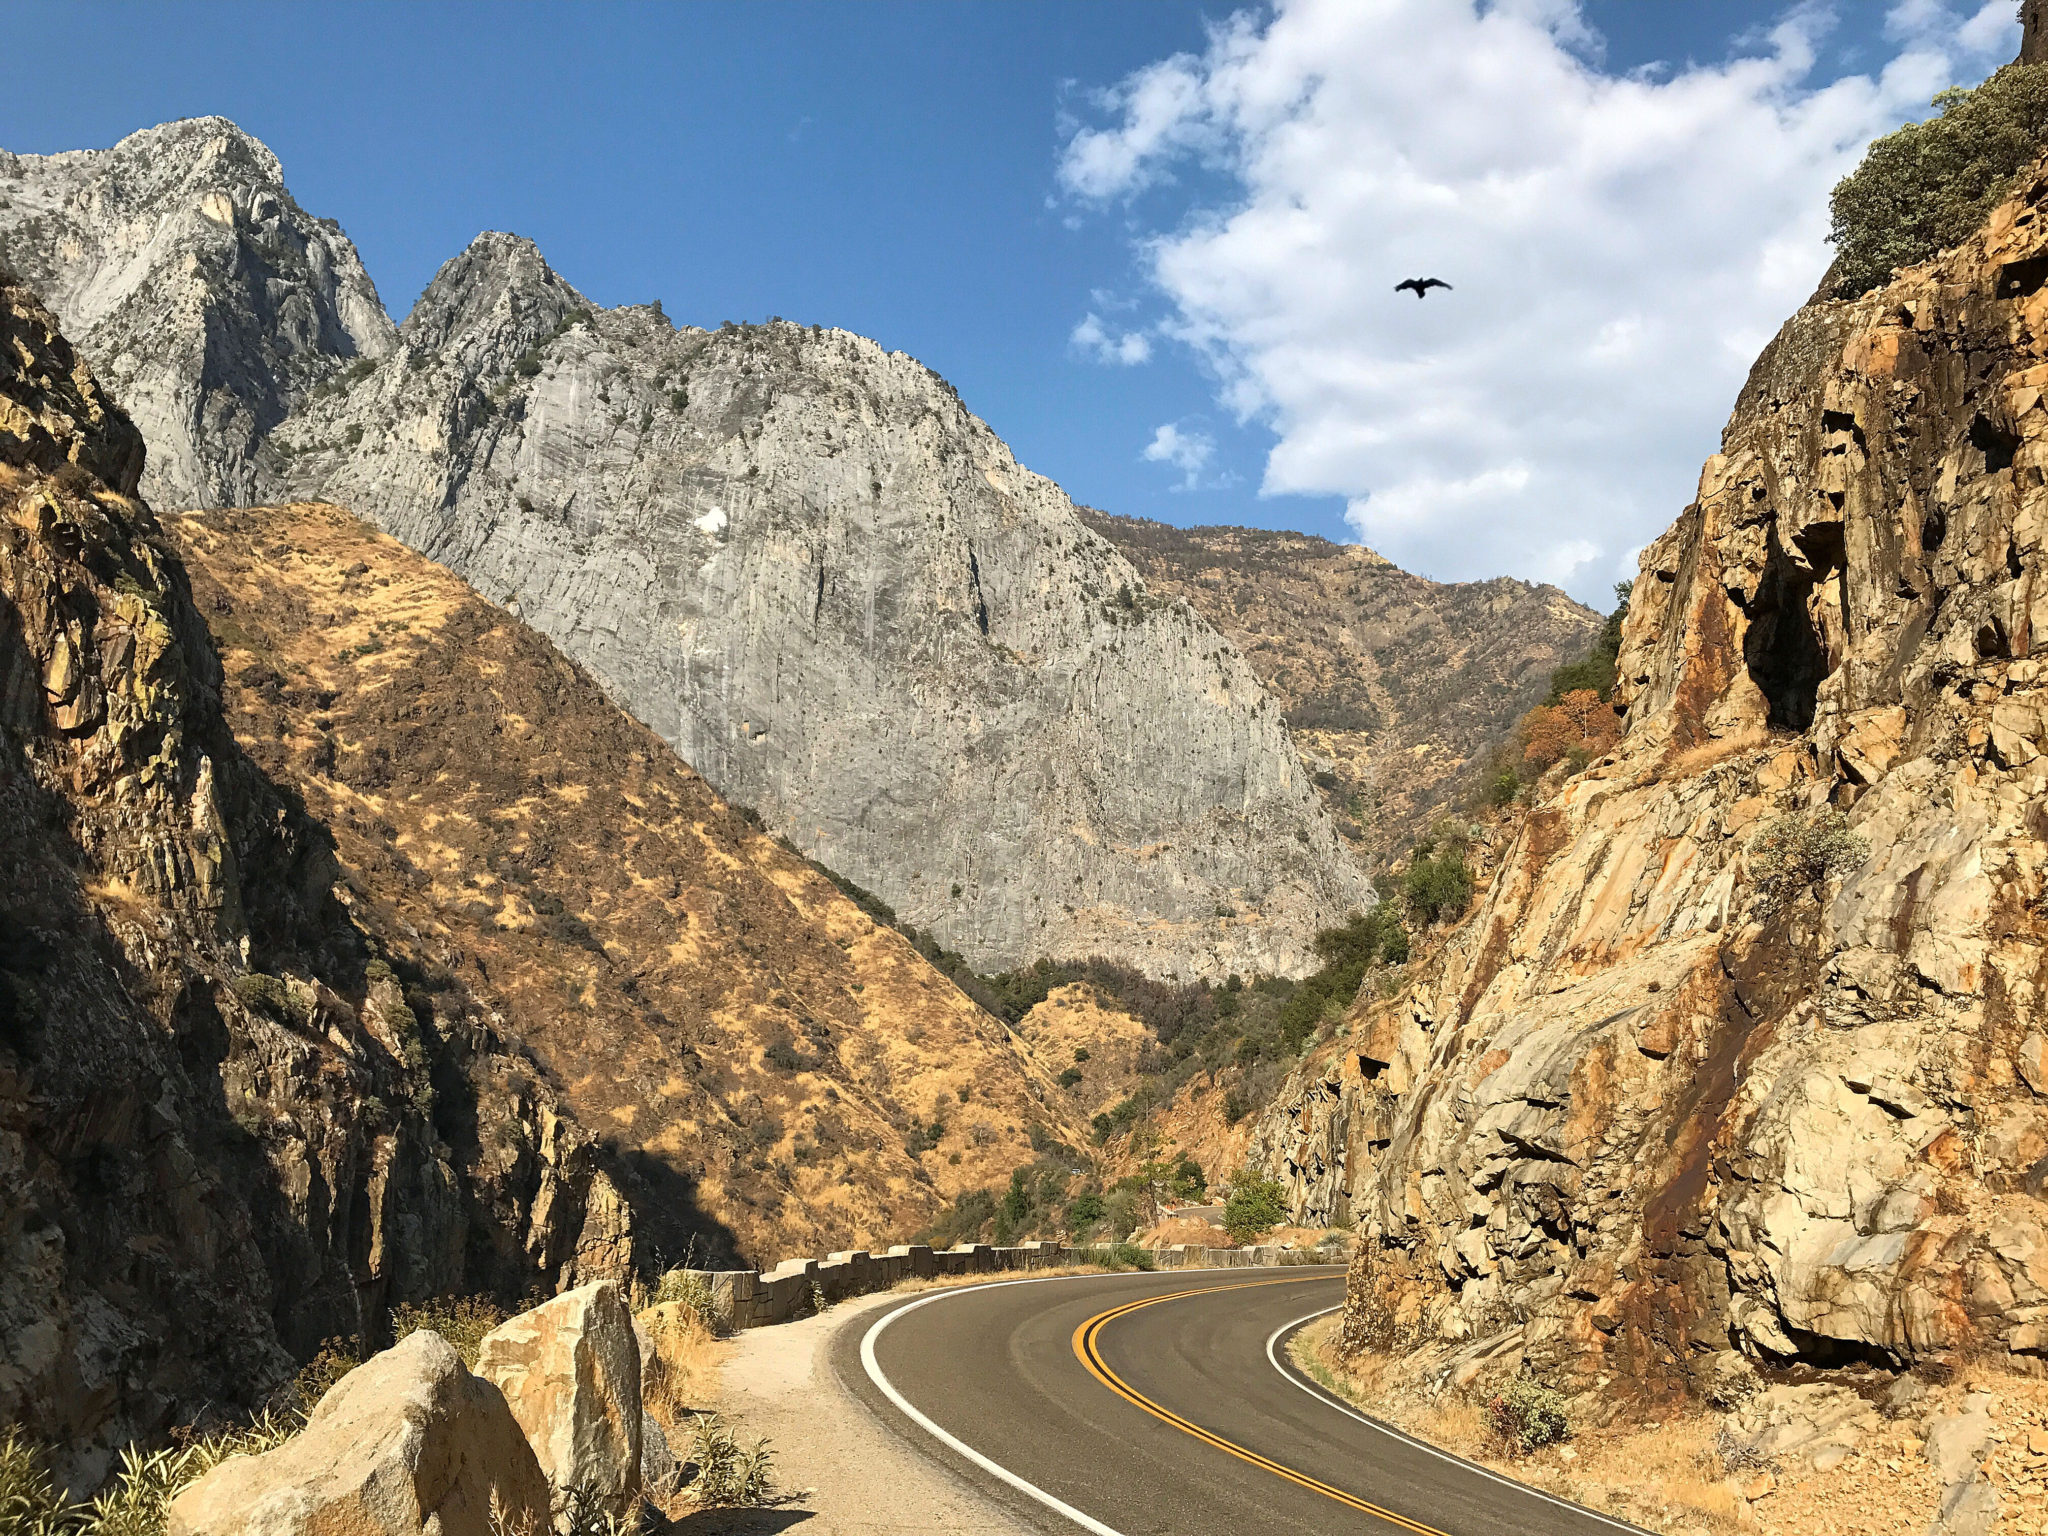 View of the Kings Canyon Scenic Byway